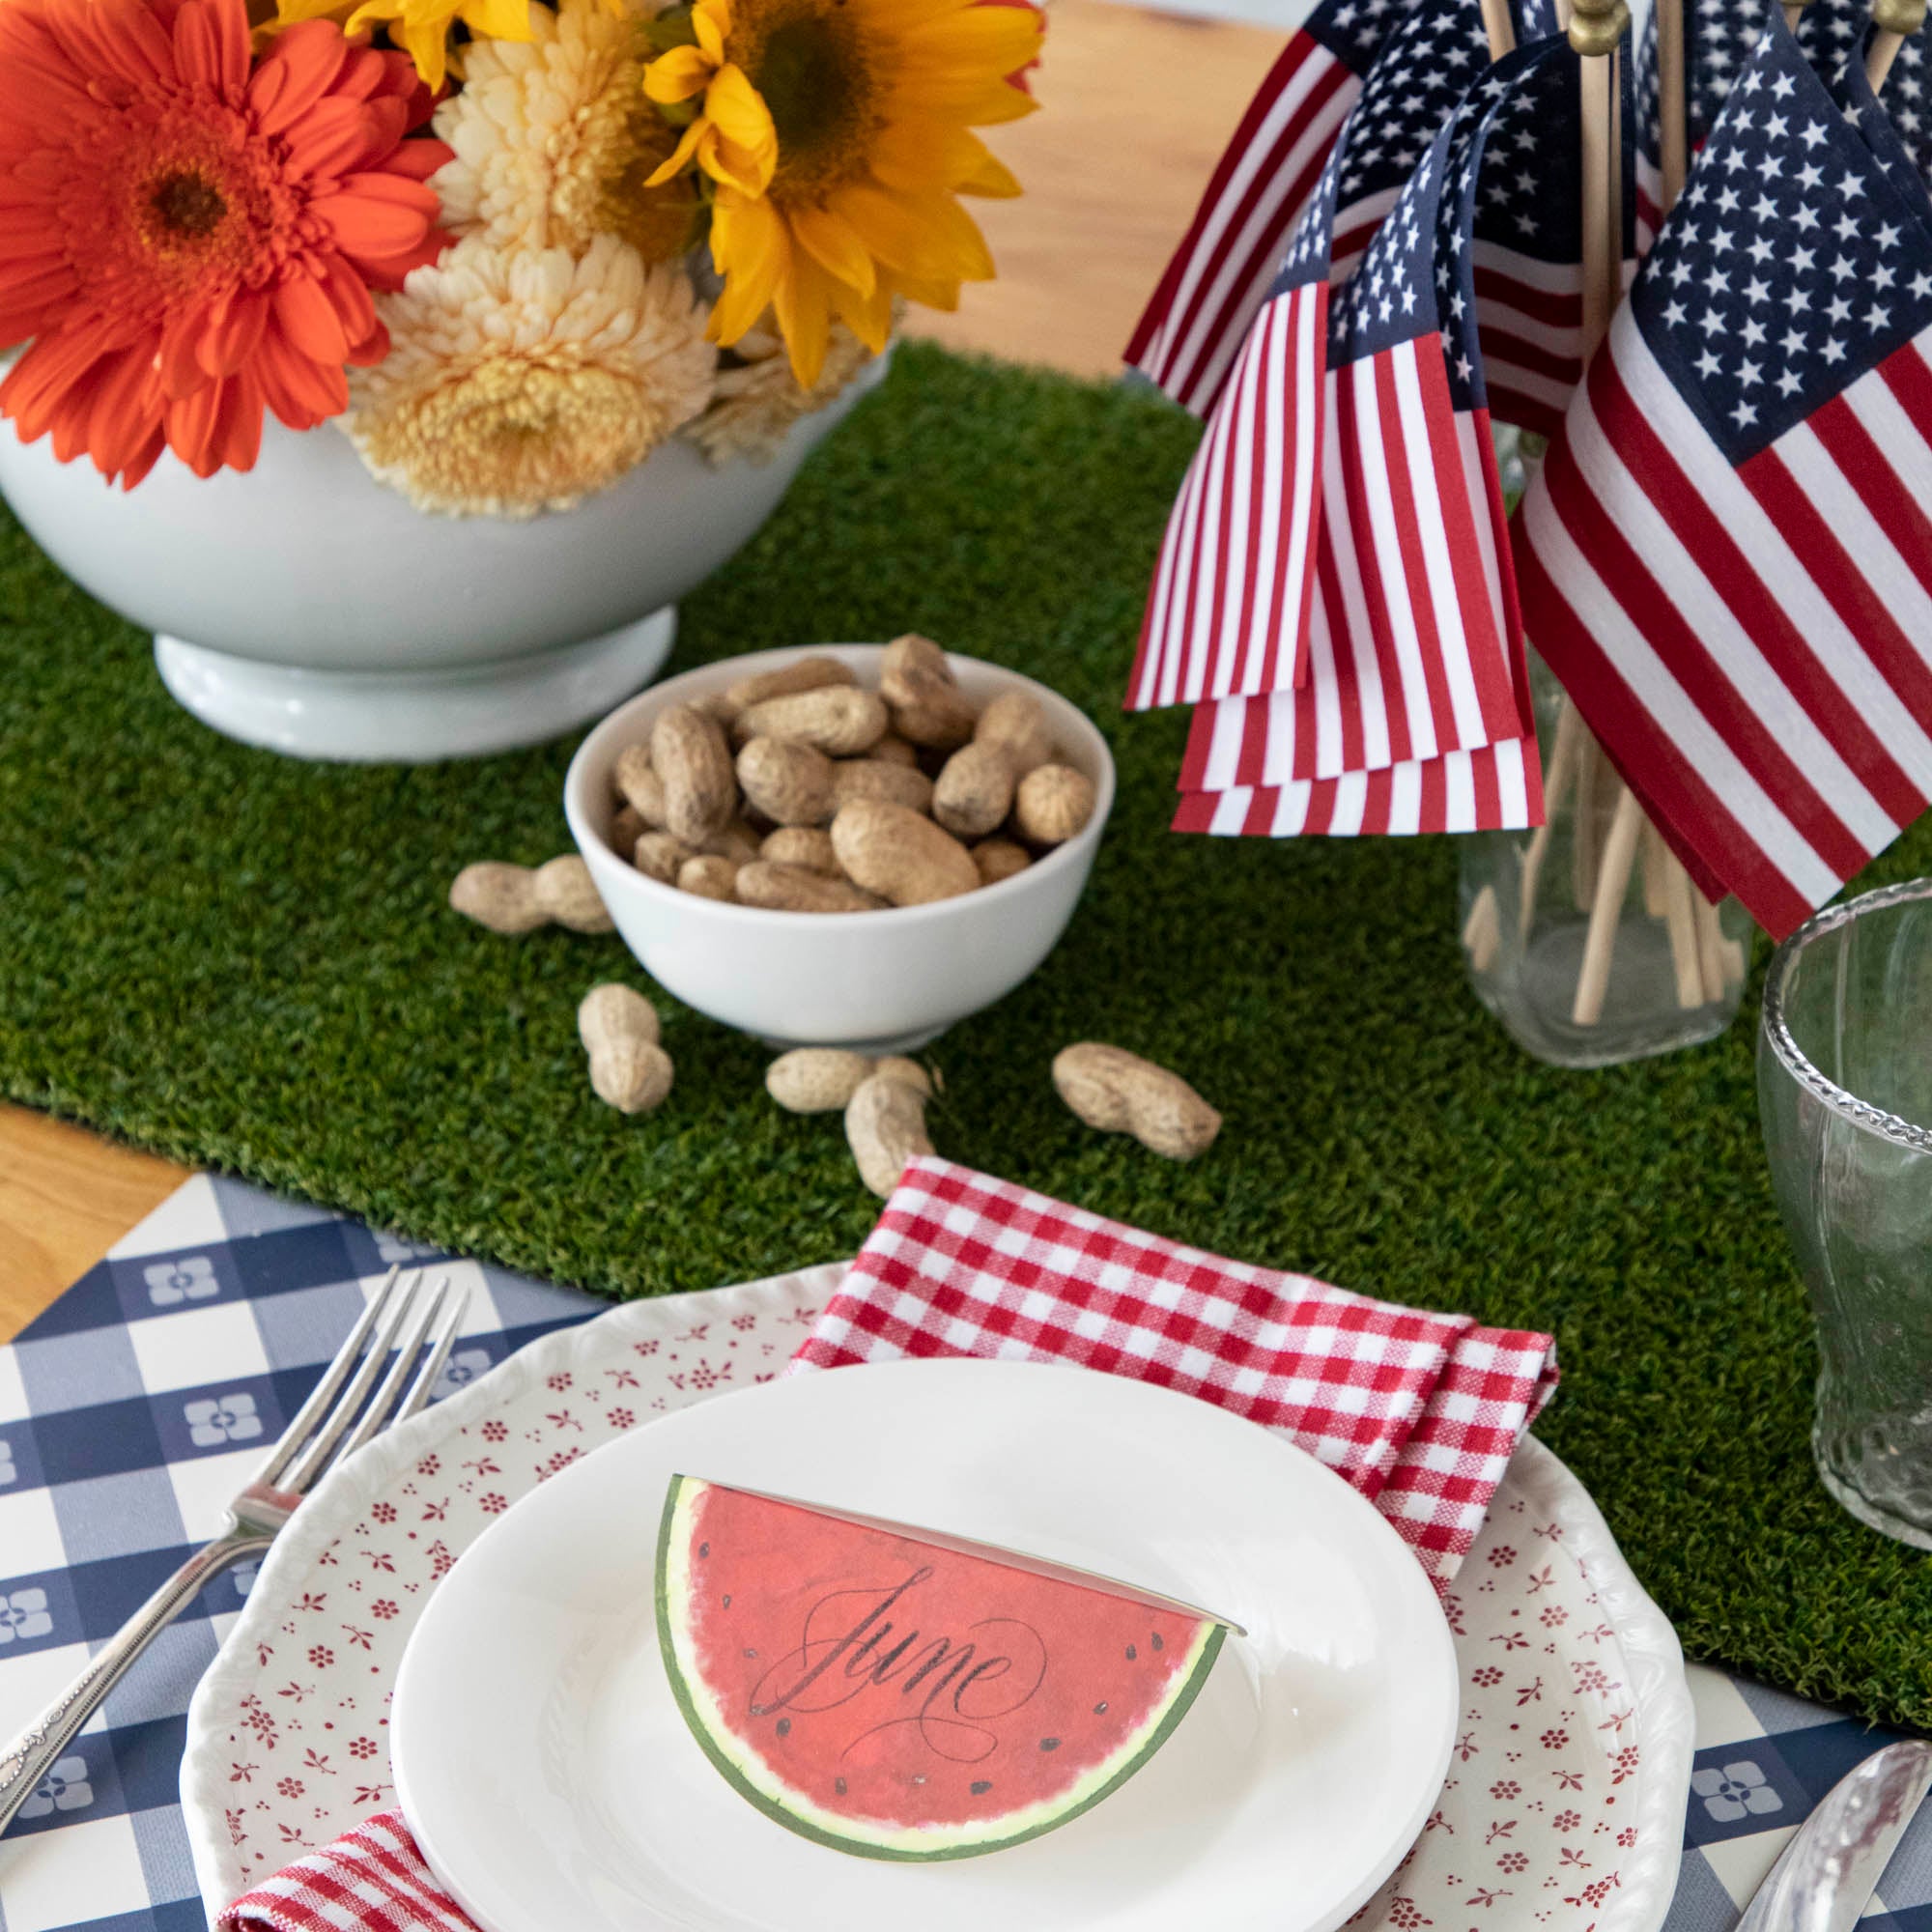 Celebrate the 4th of July with a festive table setting featuring watermelon, sunflowers, and flags. This party setup also includes the addition of Talking Tables Artificial Grass Table Runner as a unique touch.